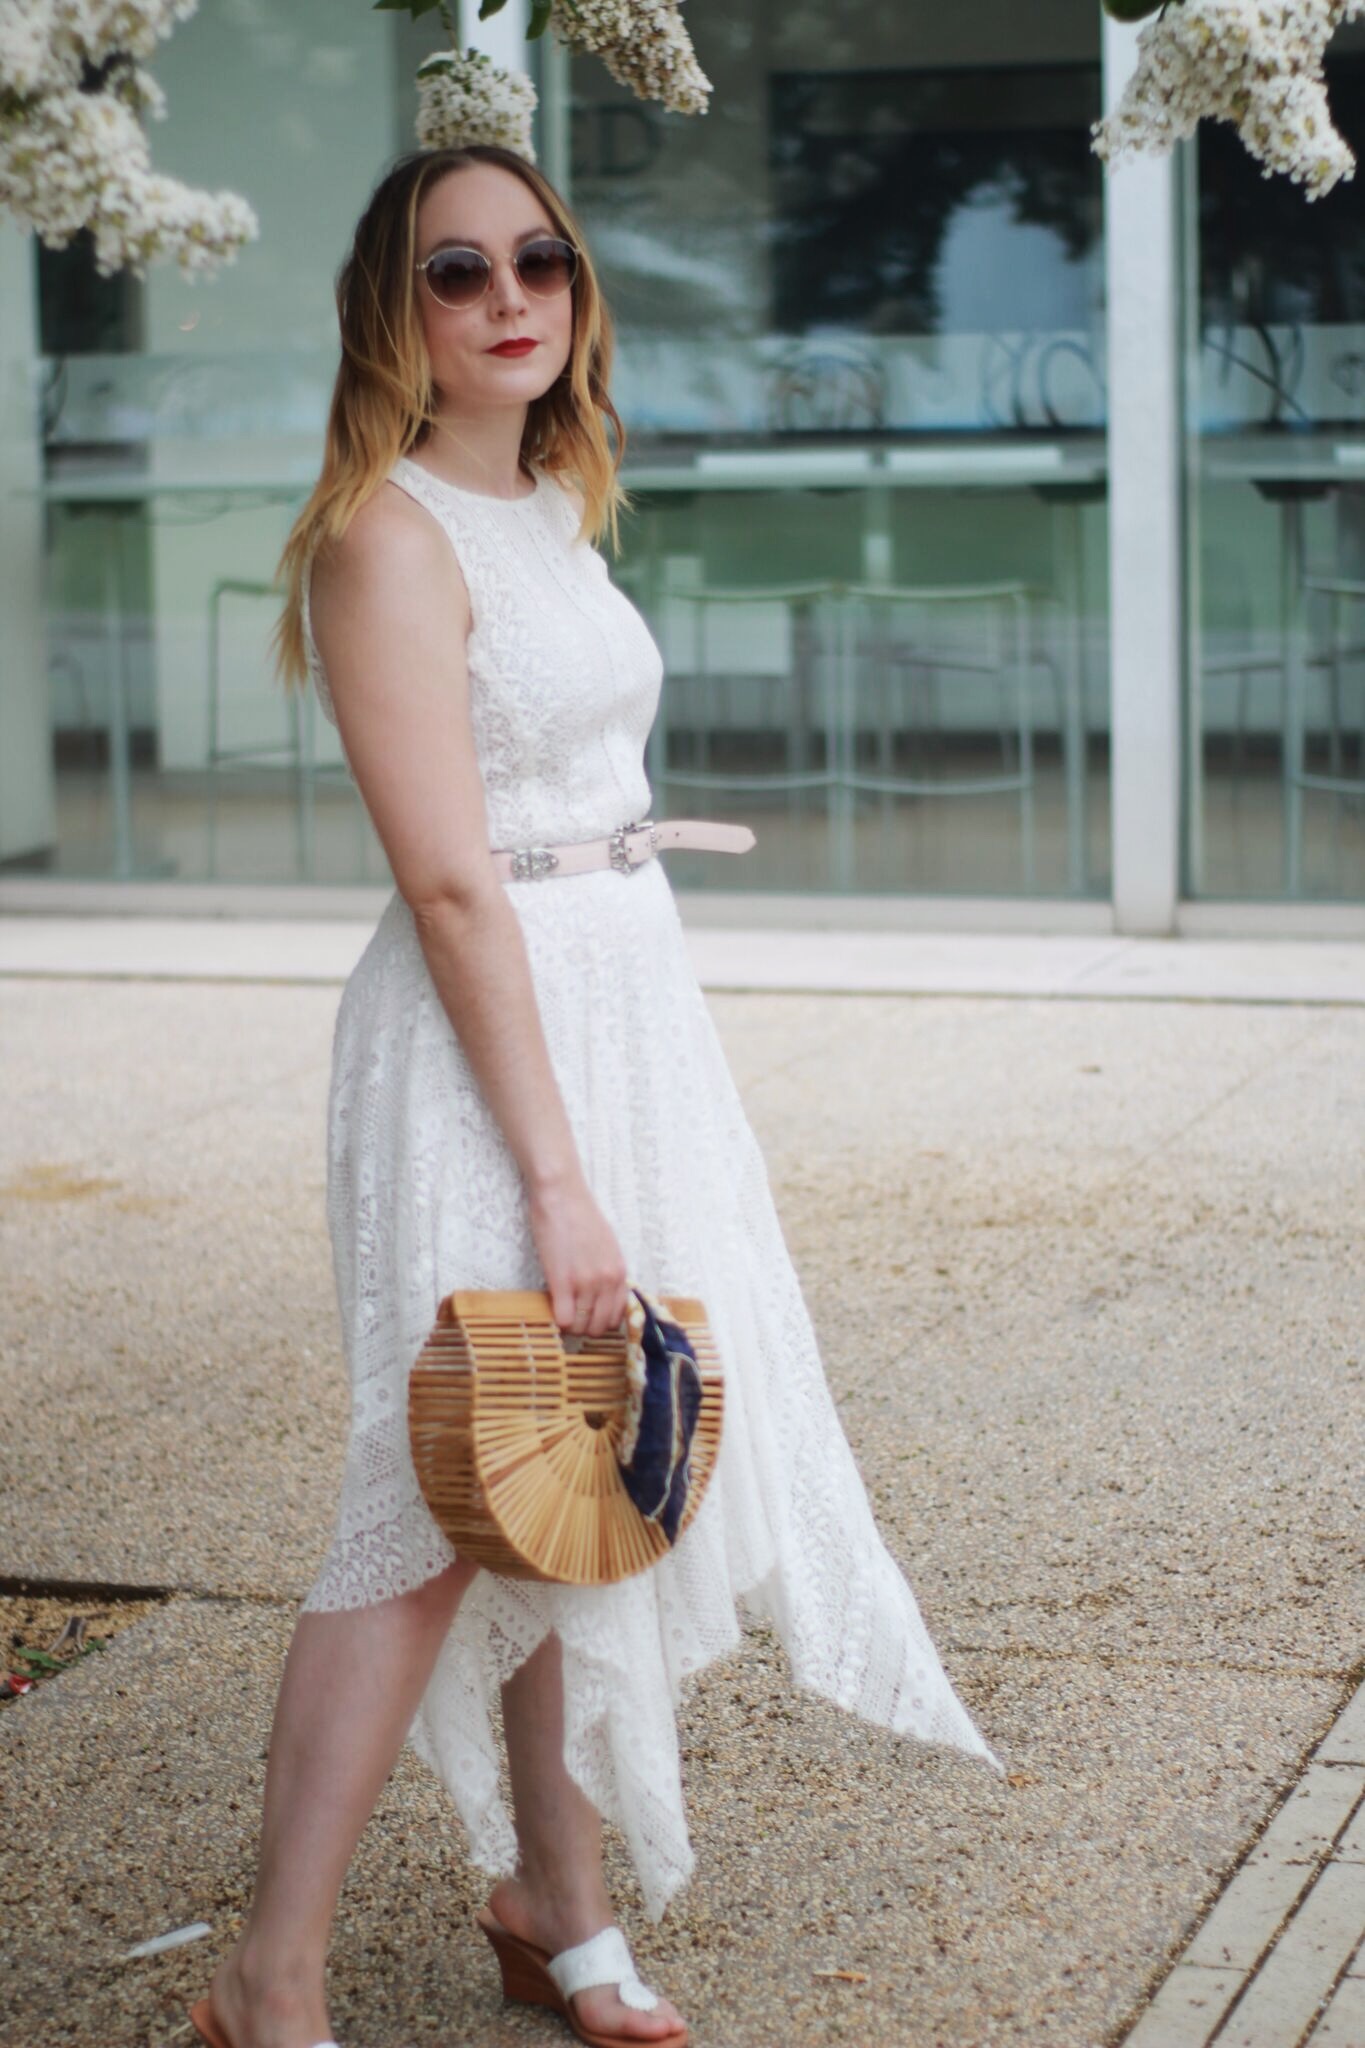 How to Accessorize a Little White Dress